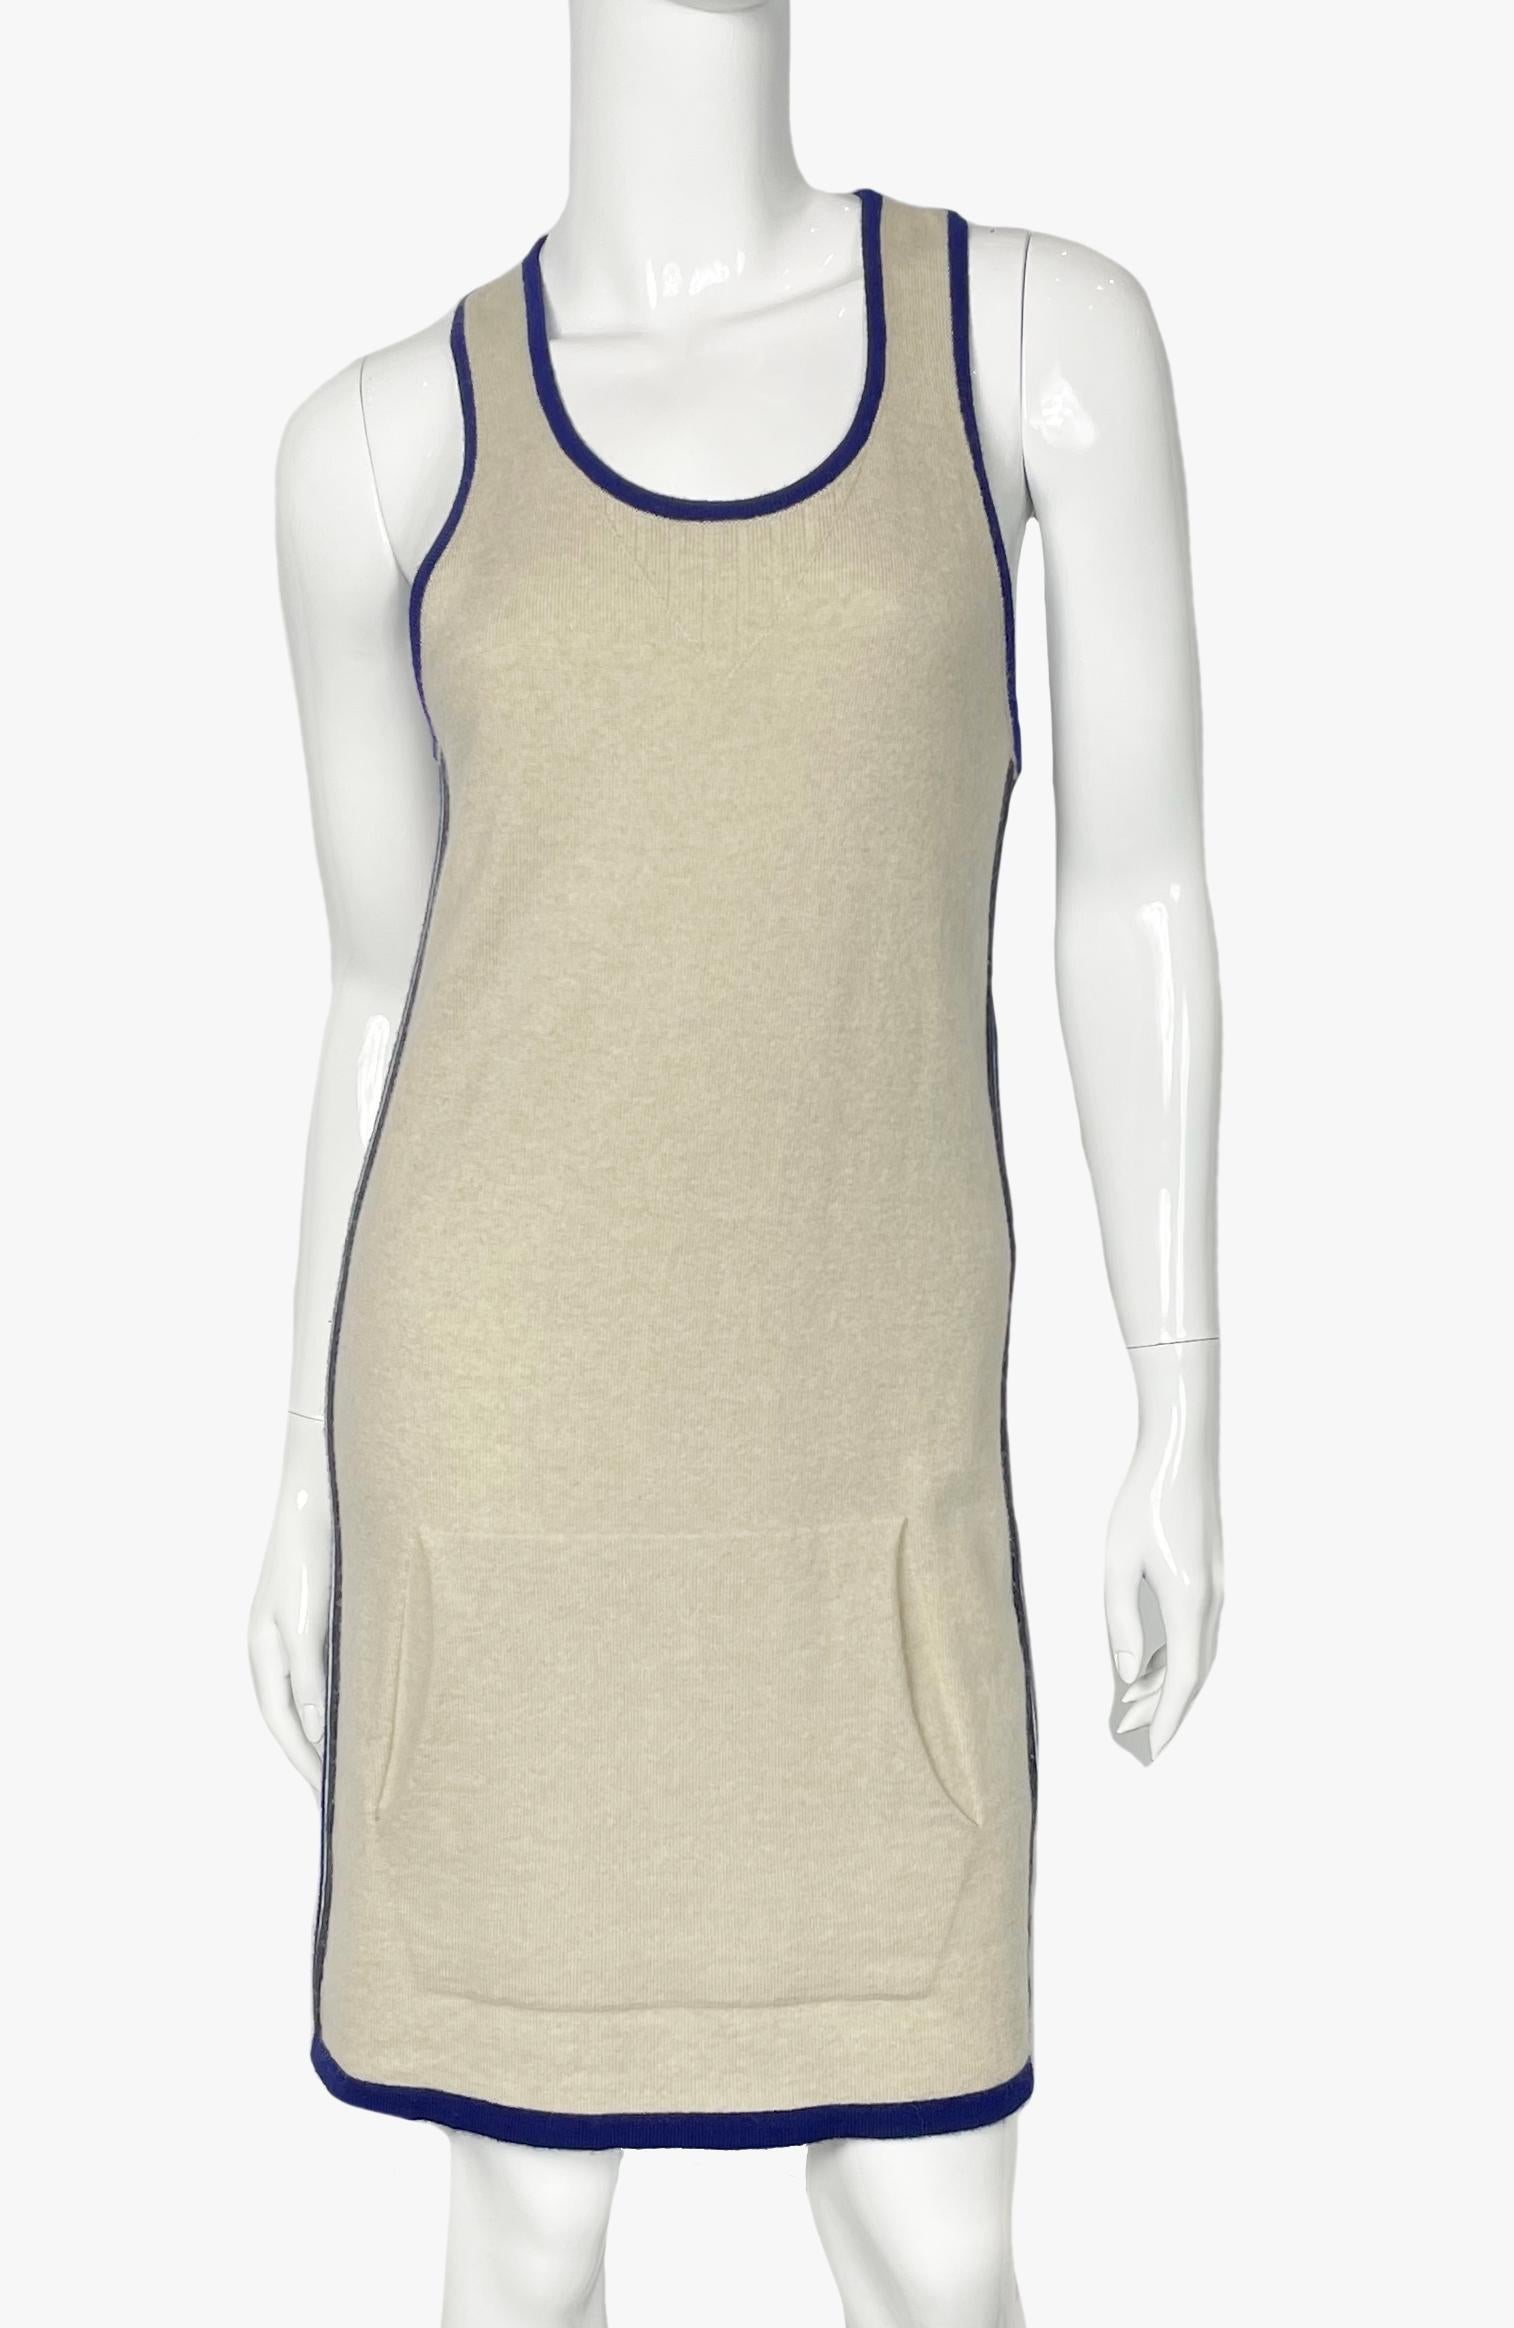 Chanel sand cashmere tank kangaroo pocket dress with blue piping, 2010s For Sale 2